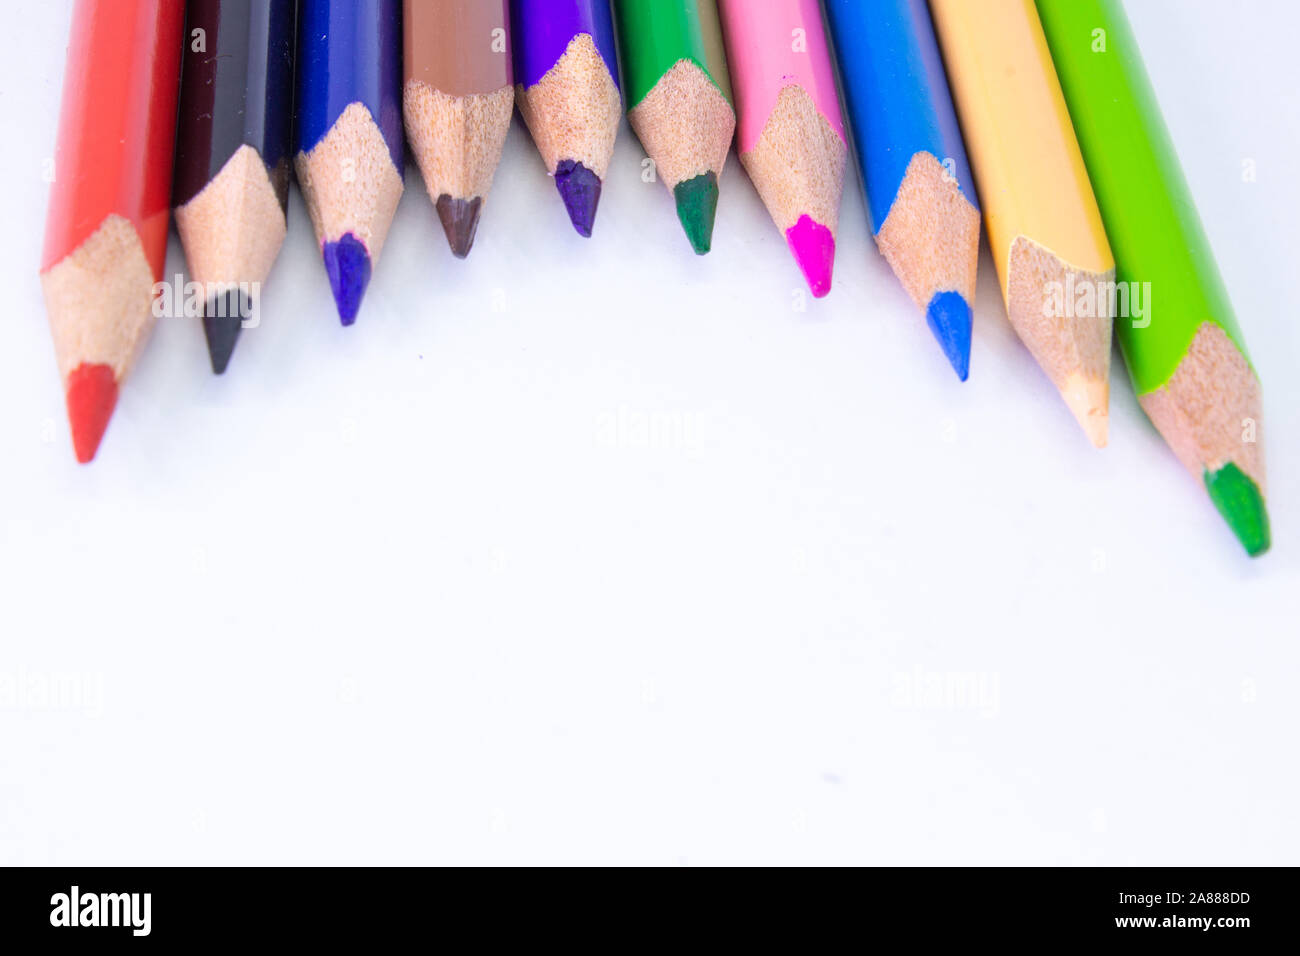 Close up picture of many colored pencil crayons on white background.  Assortment of sharpened colored pencils/ Colored drawing pencils. Selective  focu Stock Photo - Alamy